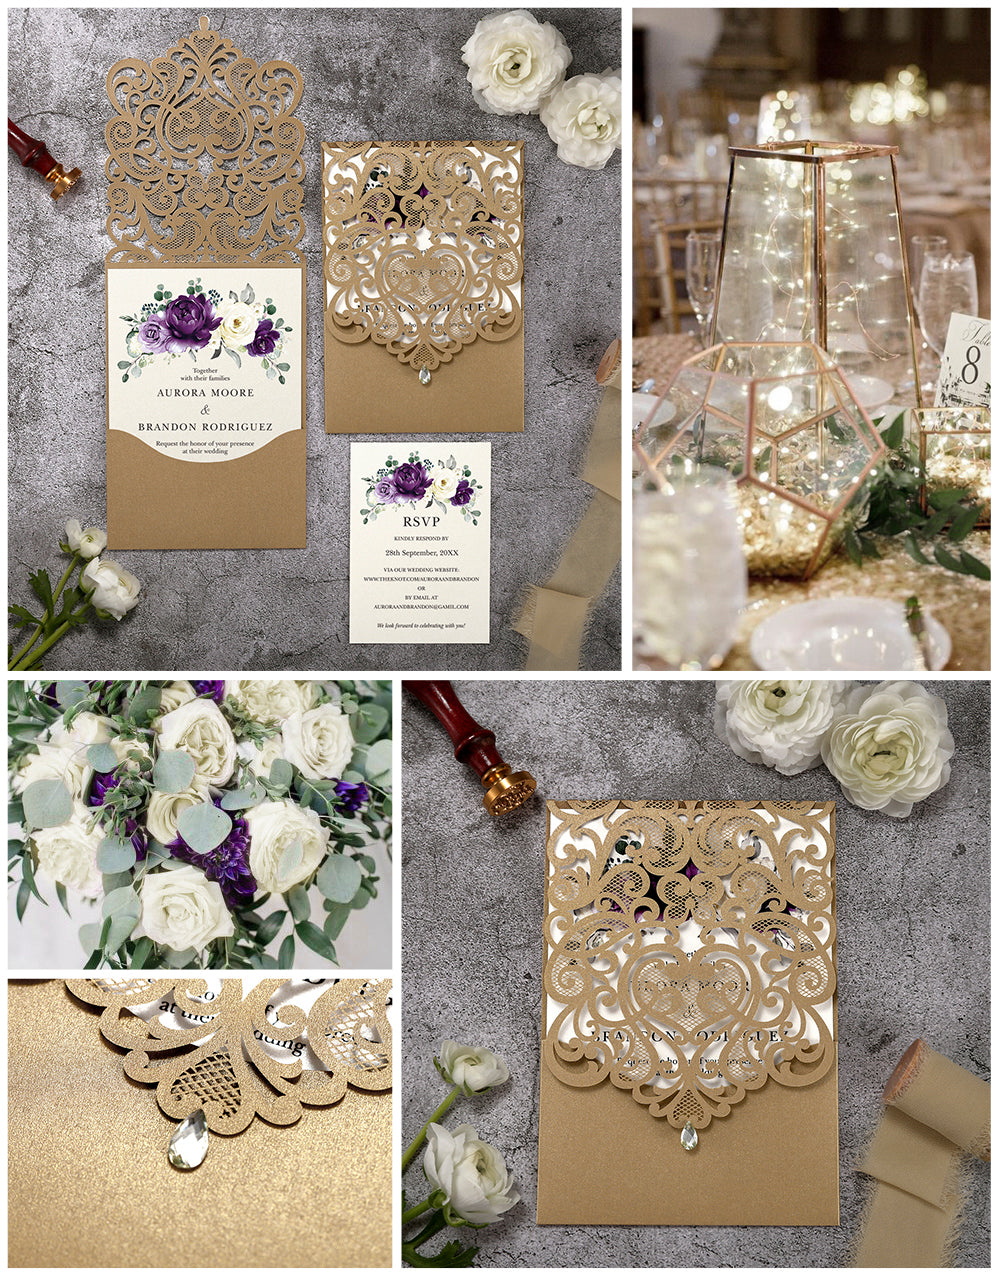 Vertical Purple Floral Laser cut invitations for Wedding Anniversary